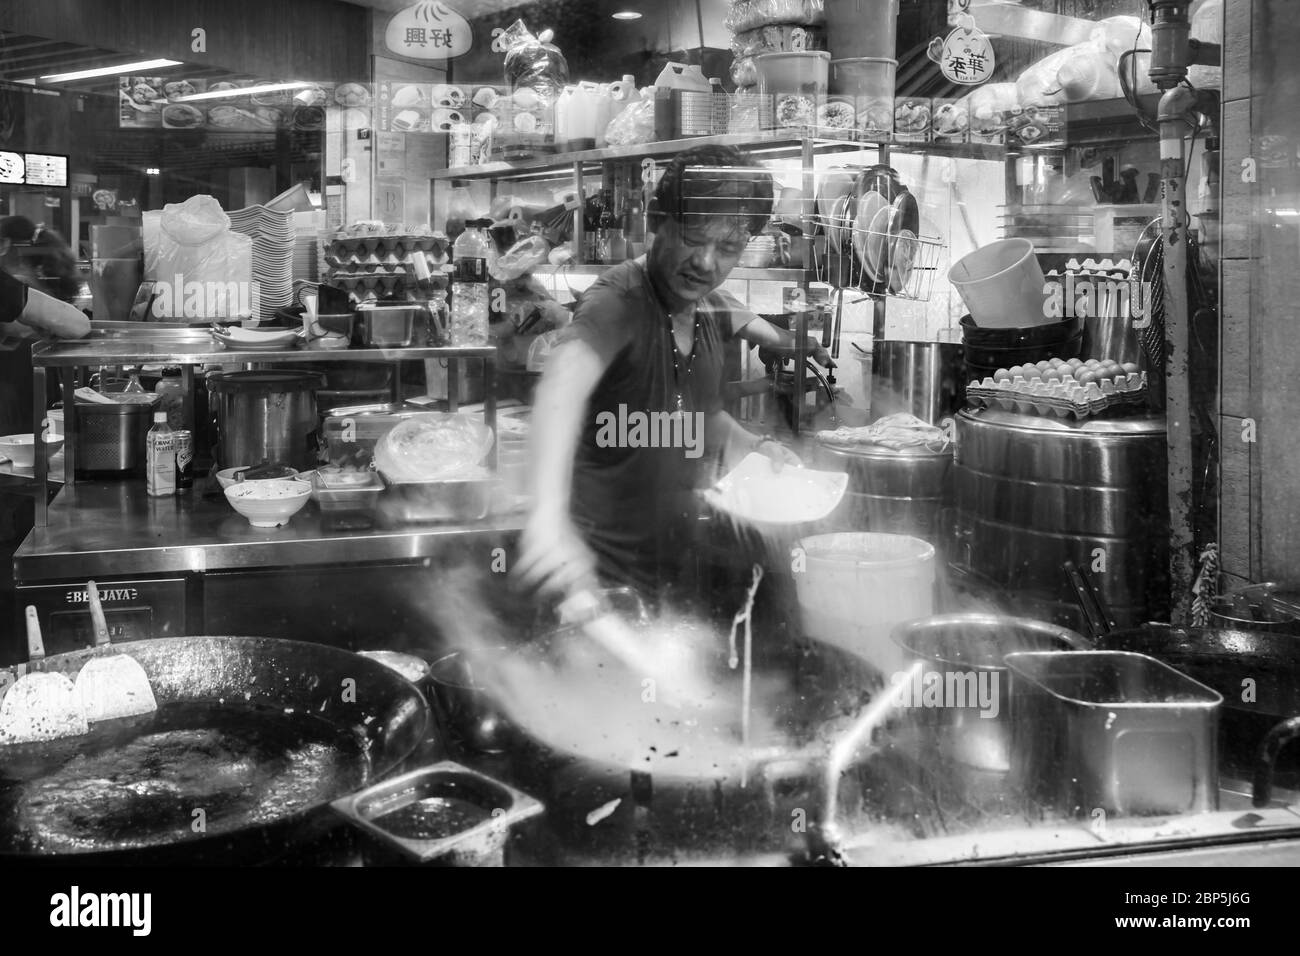 Singapore - September 07, 2019: Smiling street hawker vendor of Chinese stall in Lau Pa Sat, Telok Ayer Market hawker center, black and white Stock Photo